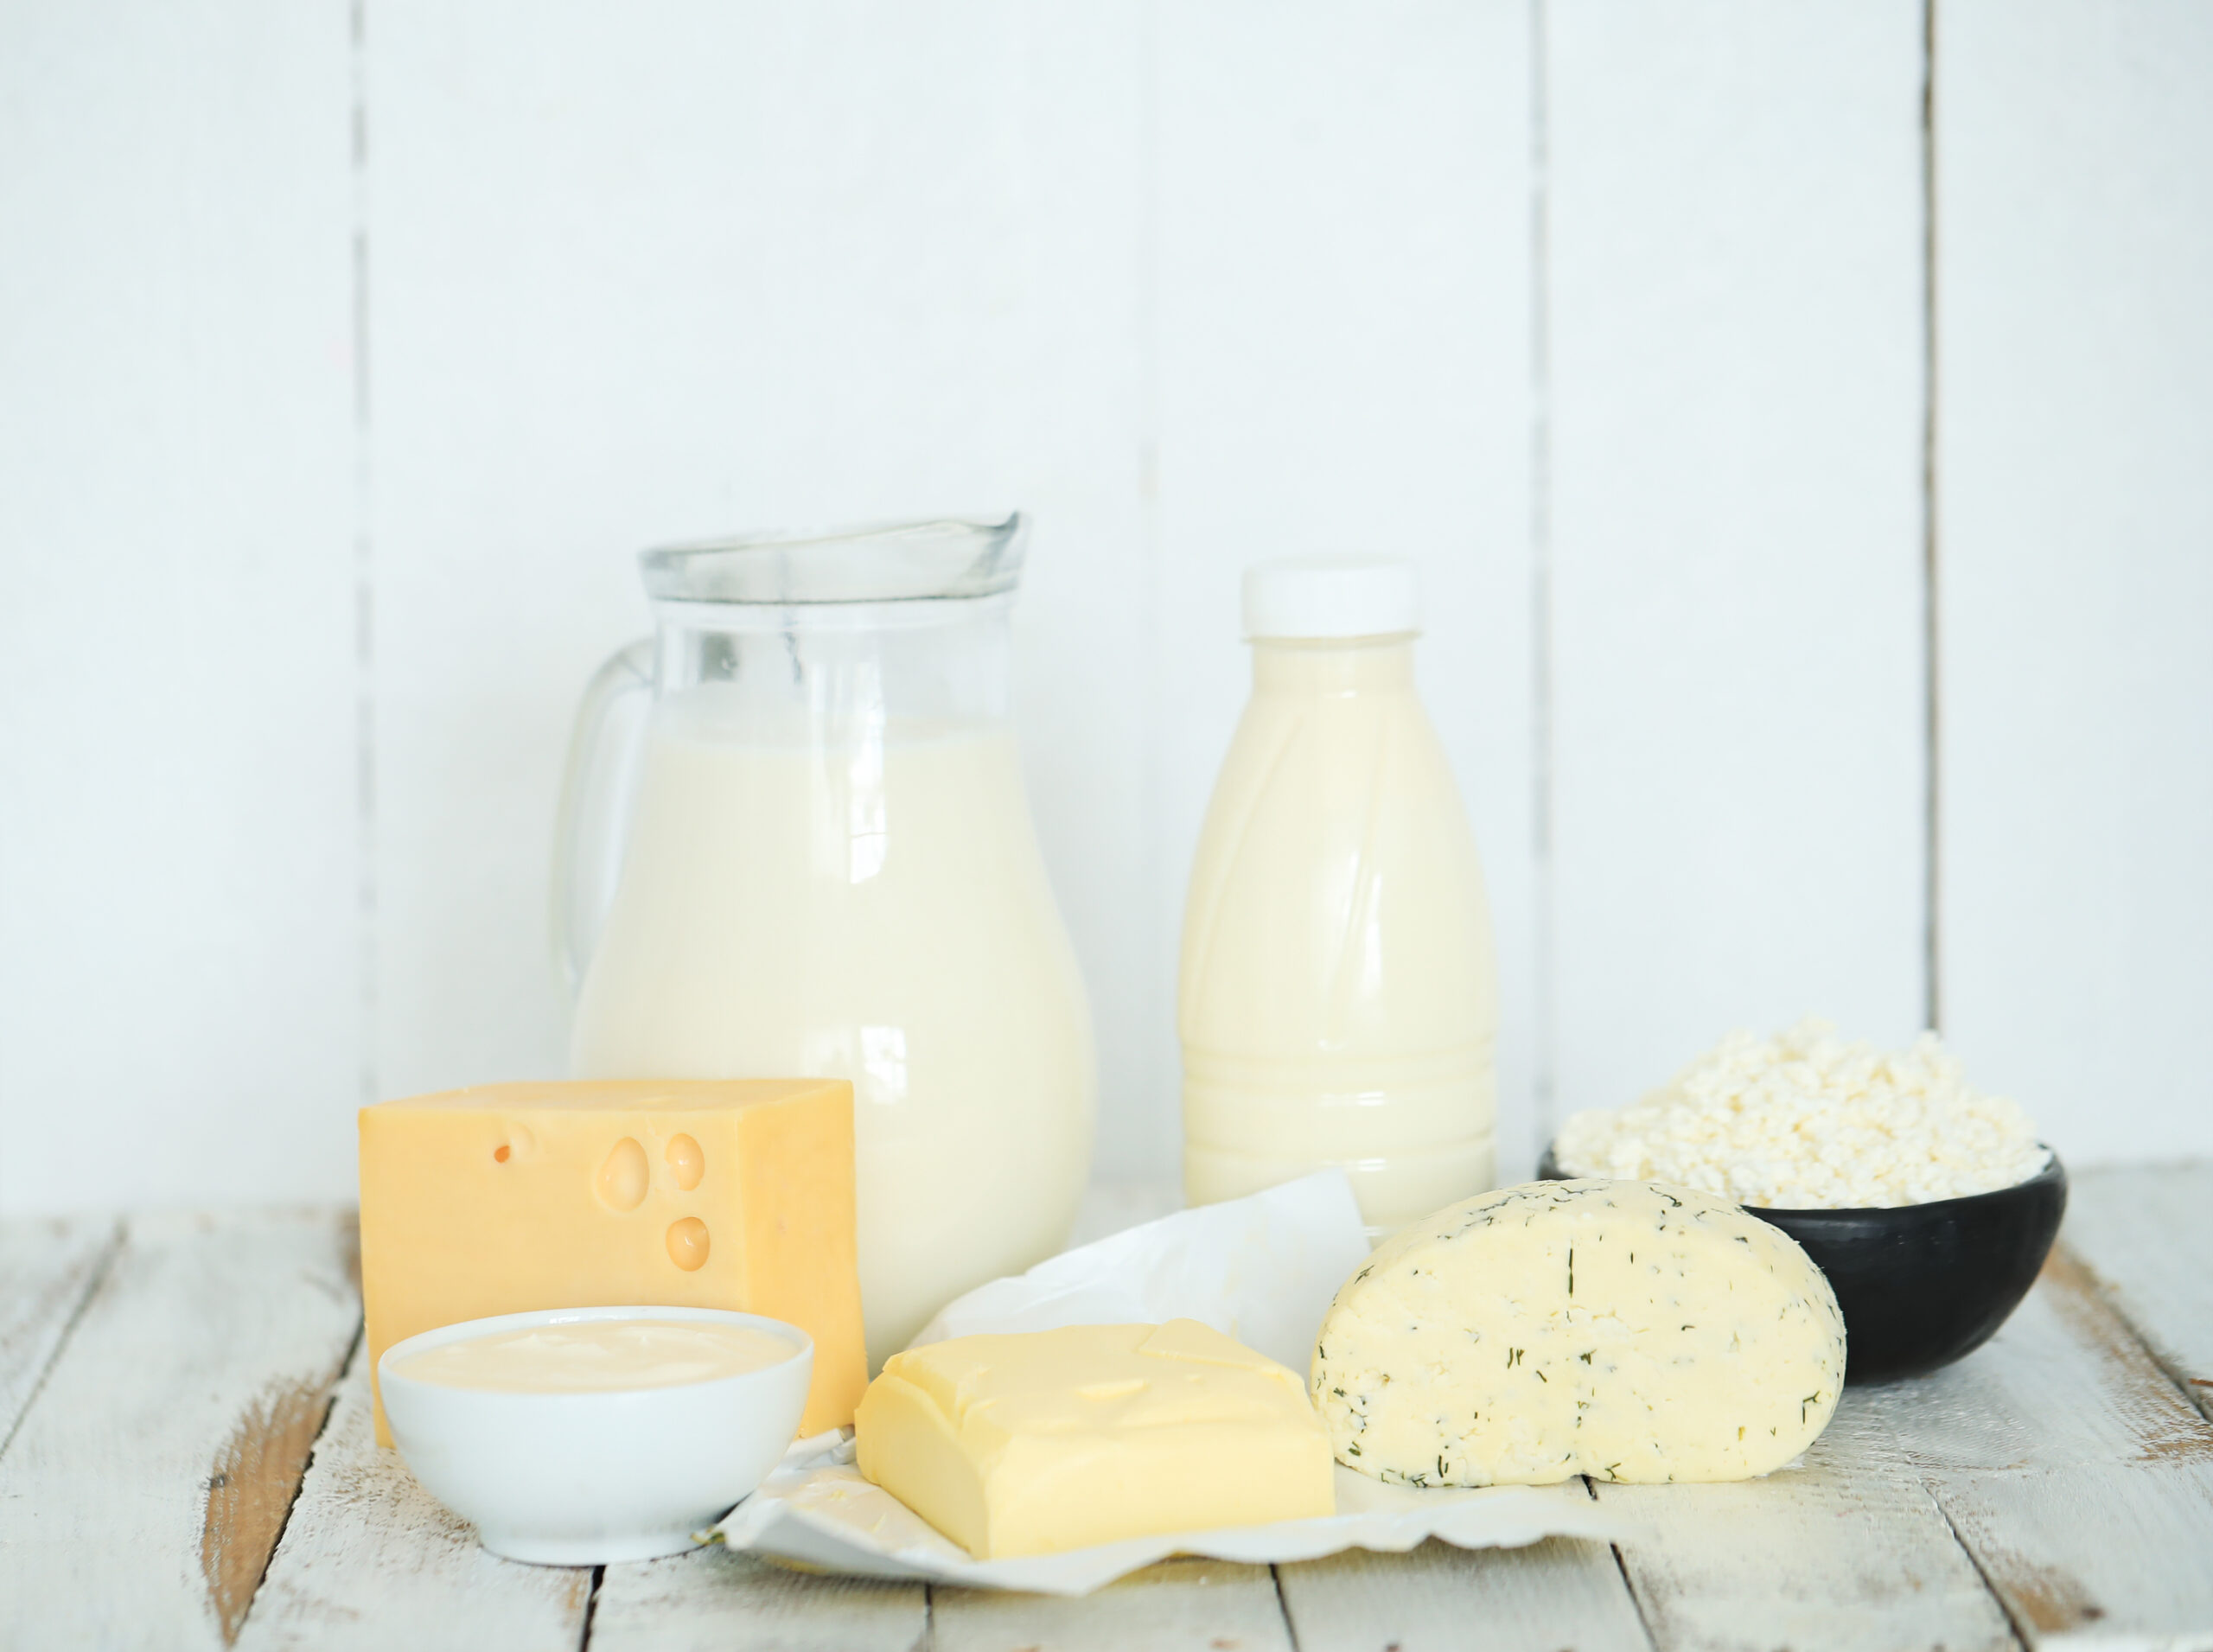 FSSAI Raises Concern Over Misleading Dairy Products in the Market